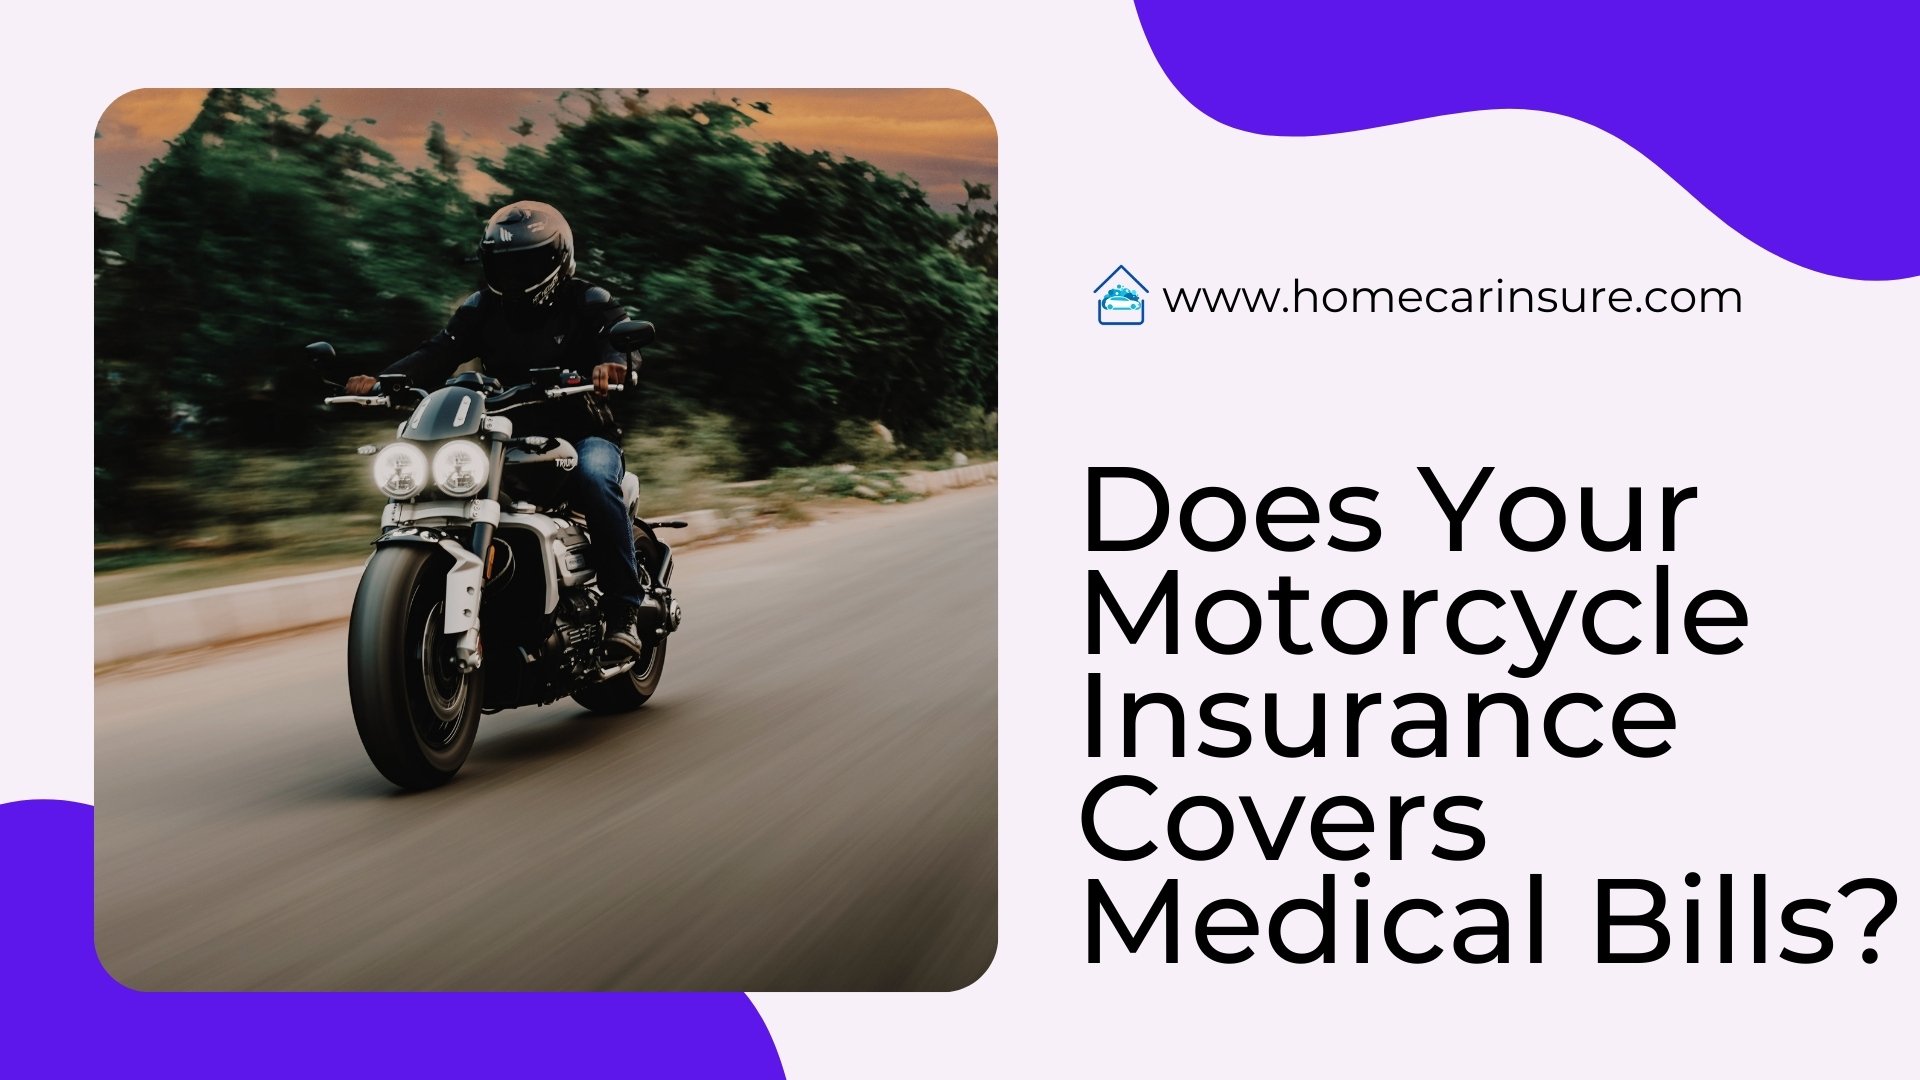 Does Your Motorcycle Insurance Cover Medical Bills